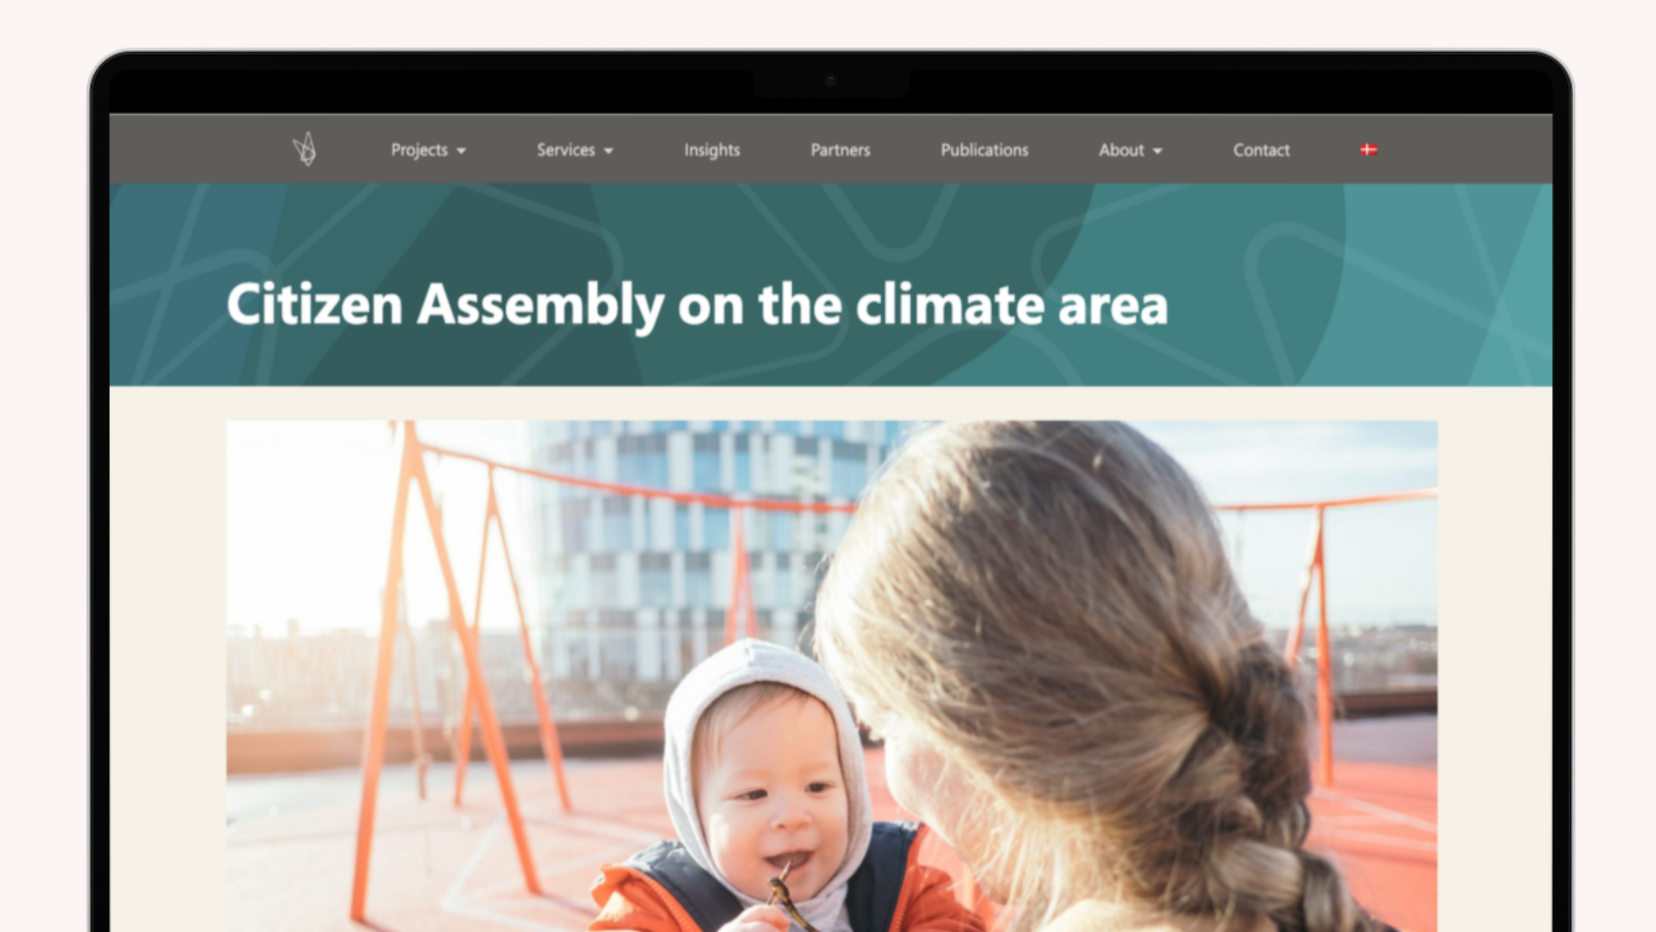 Mockup of the landing page for Denmark's climate assembly